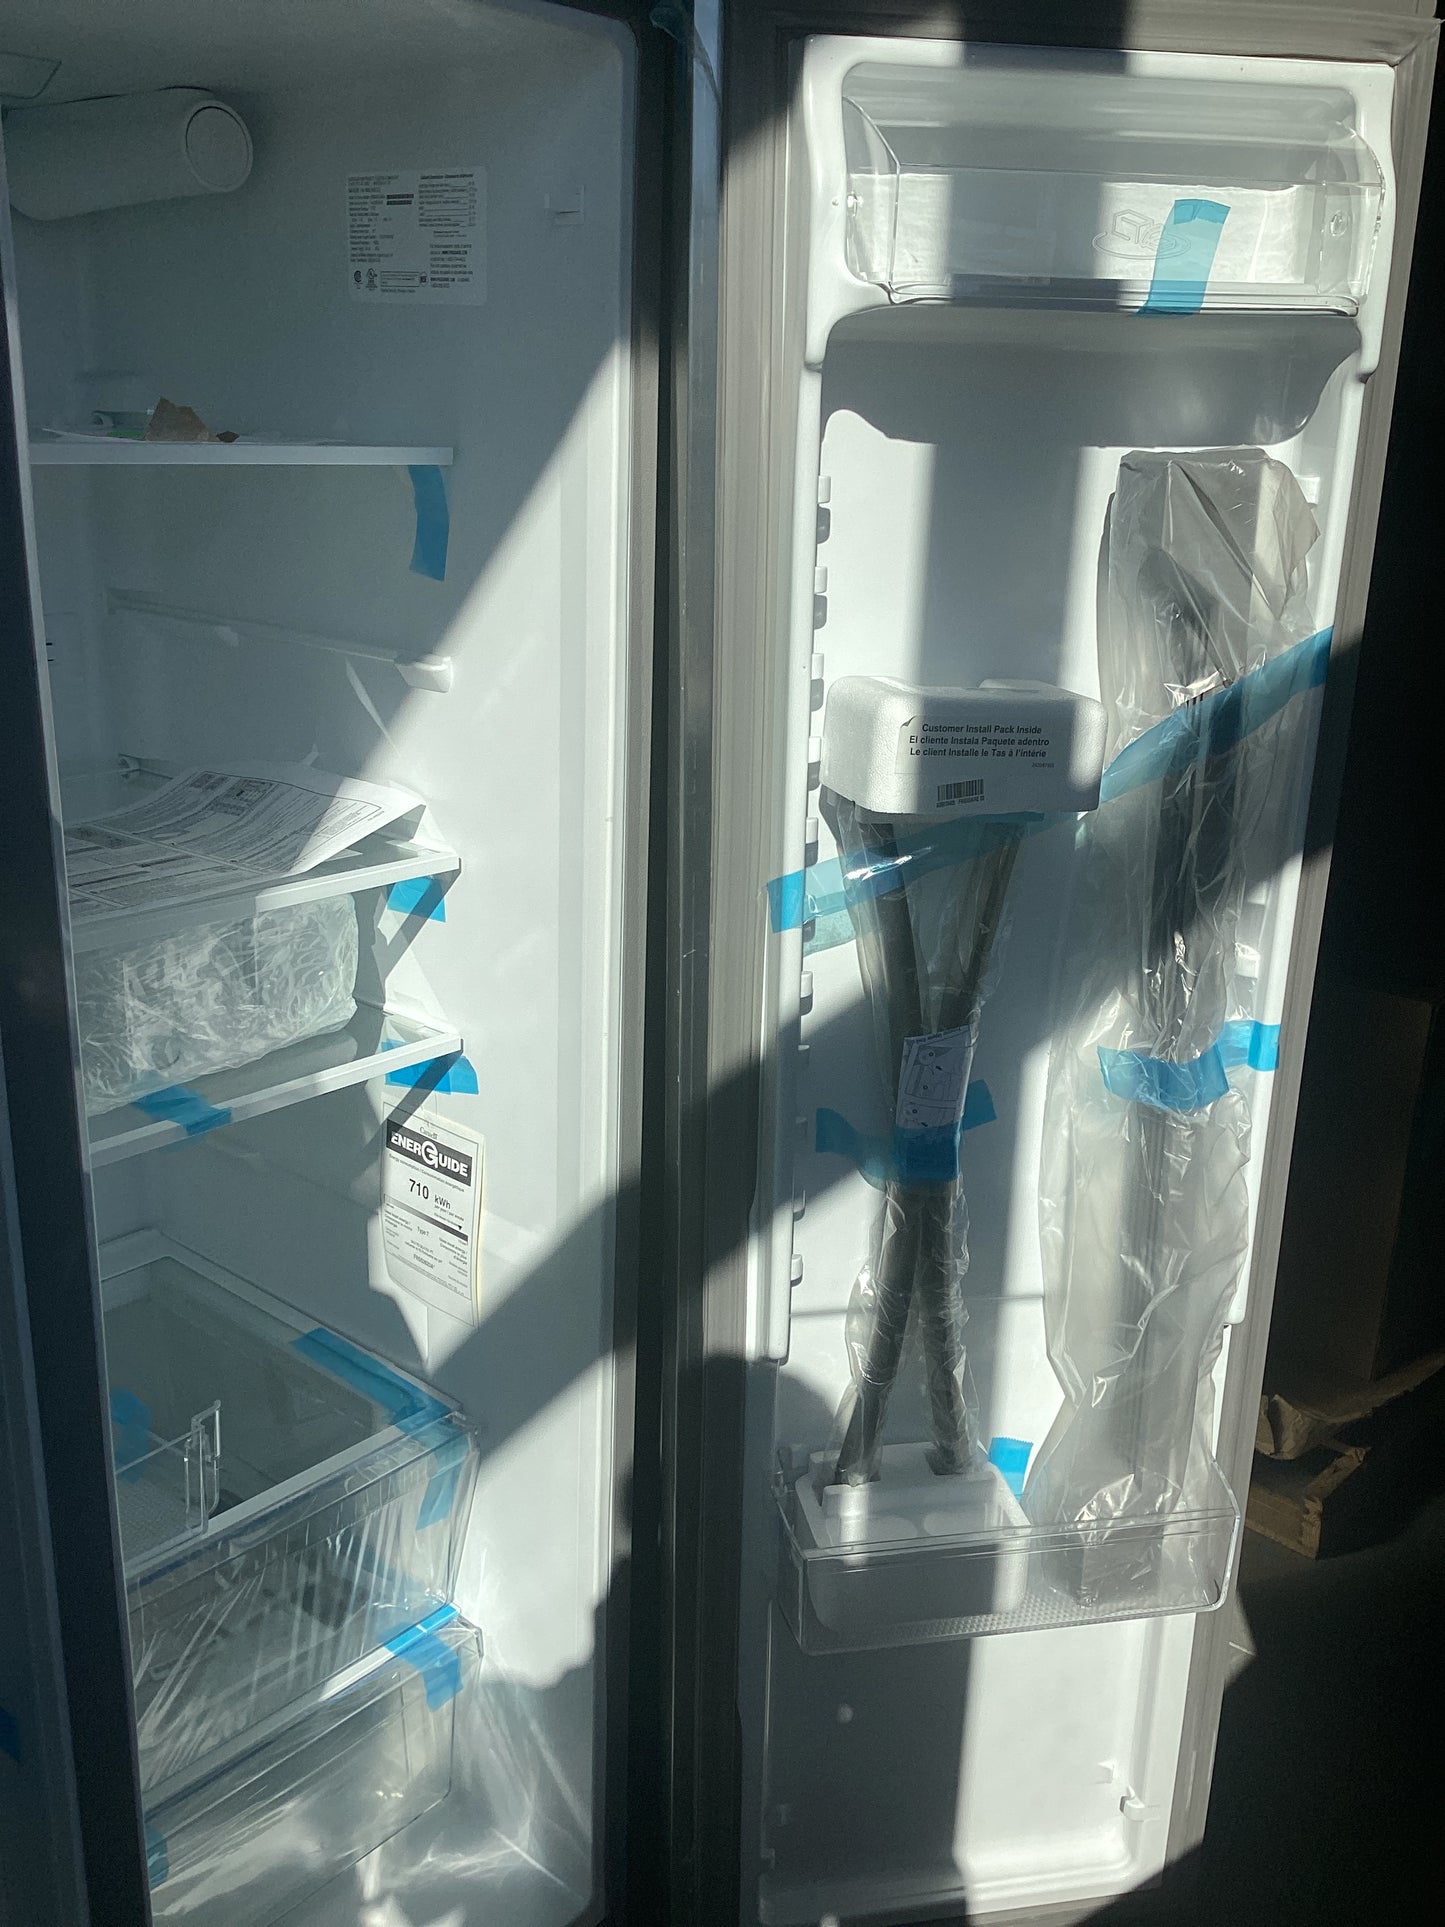 A refrigerator with a plastic bag covering the door, preventing air from entering.